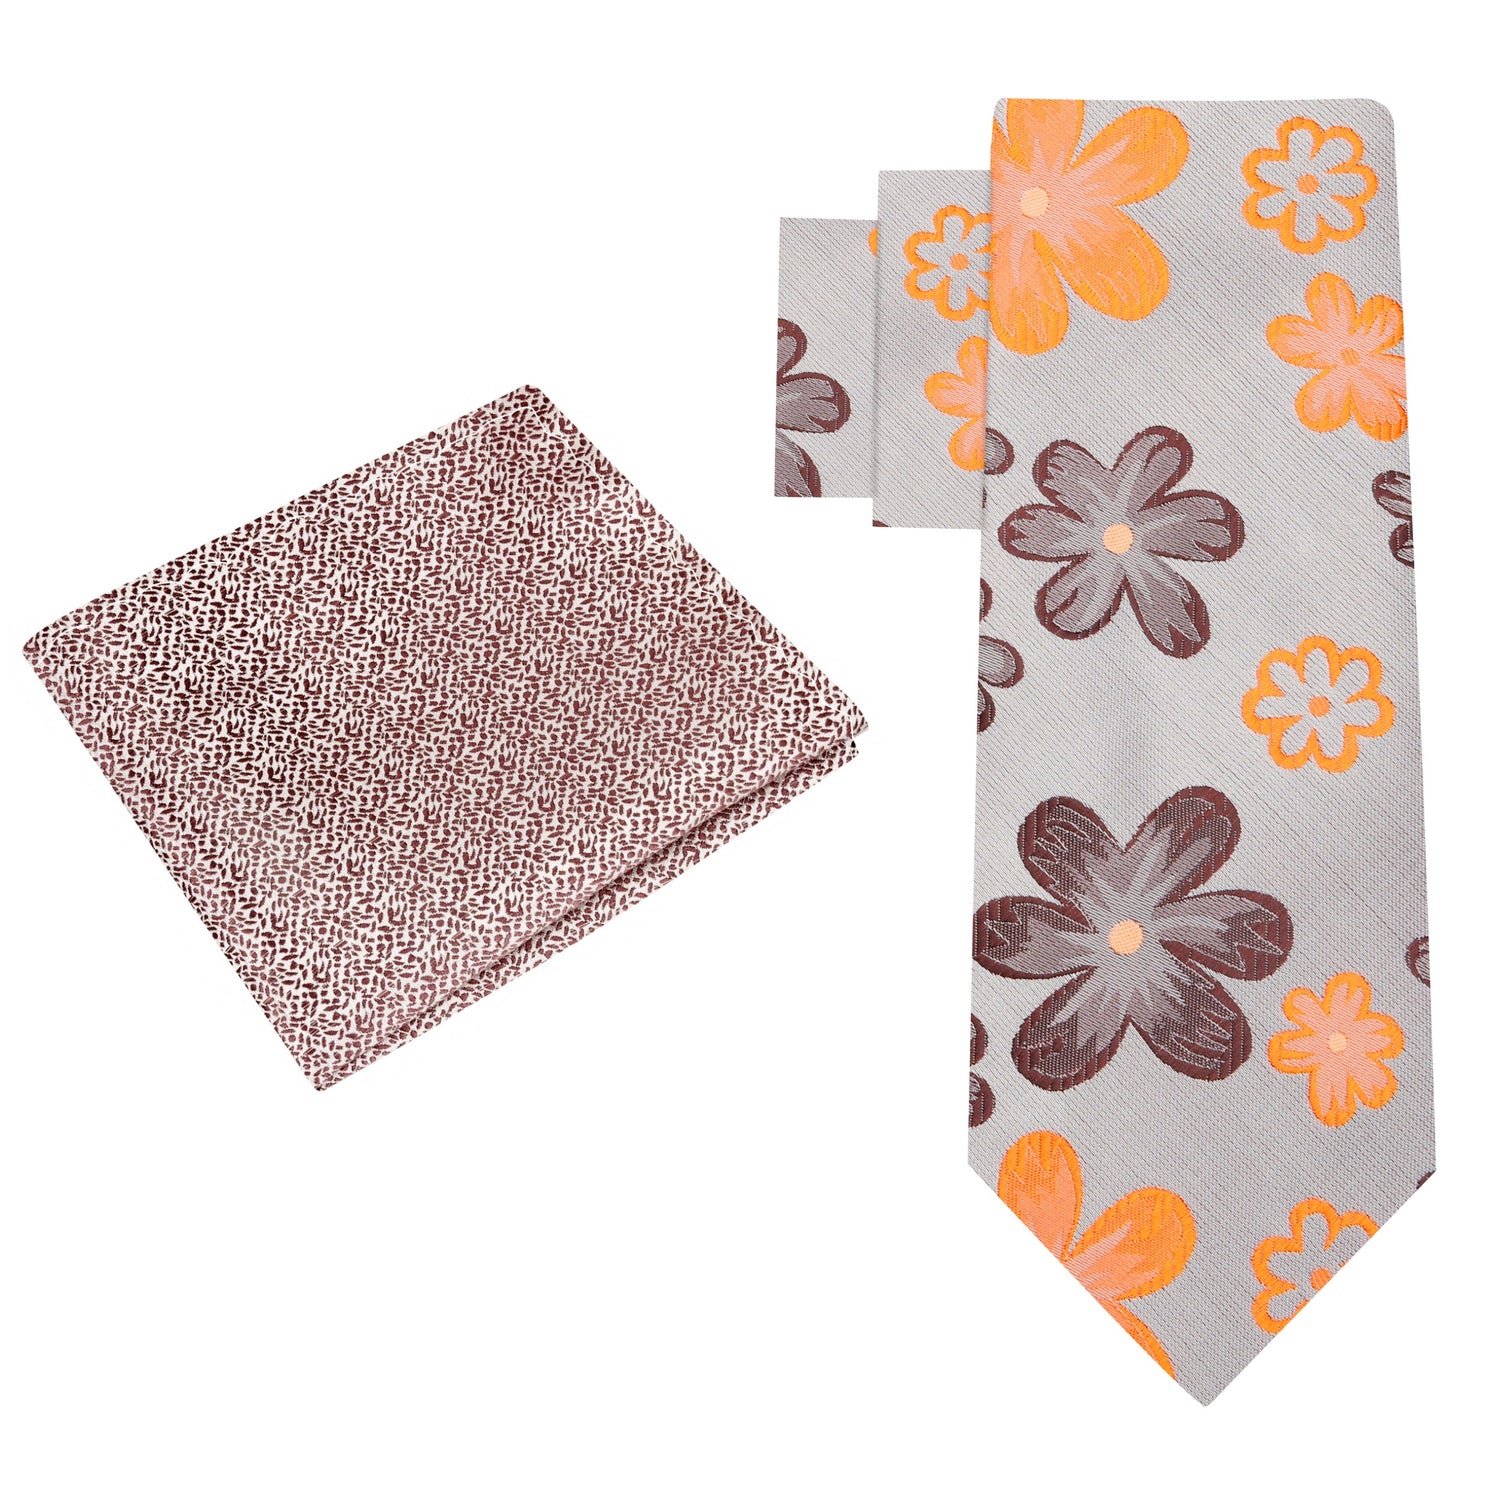 Alt View: Beige With Brown and Orange Flowers Necktie and Accenting Square